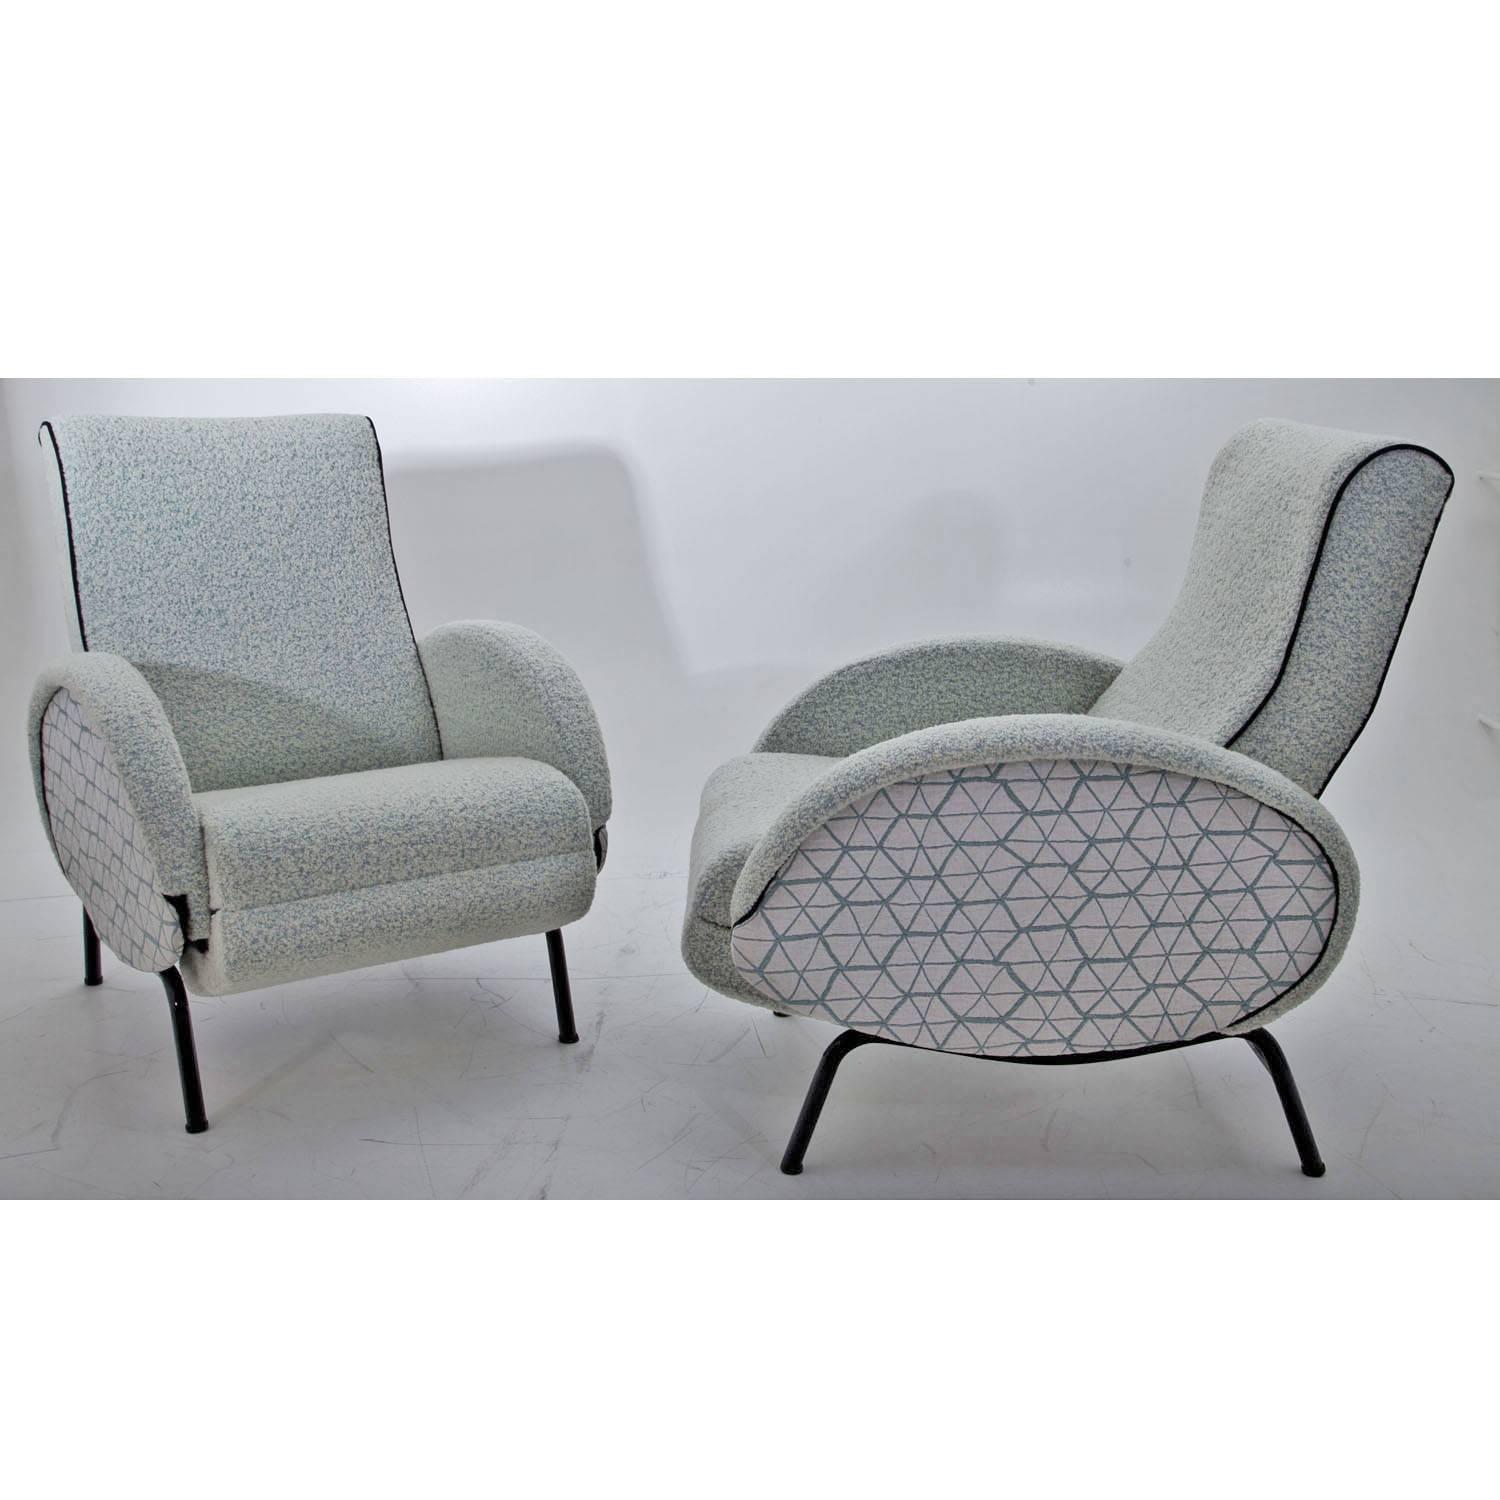 Mid-20th Century Lounge Chairs by Dormiveglia, Italy, 1950s